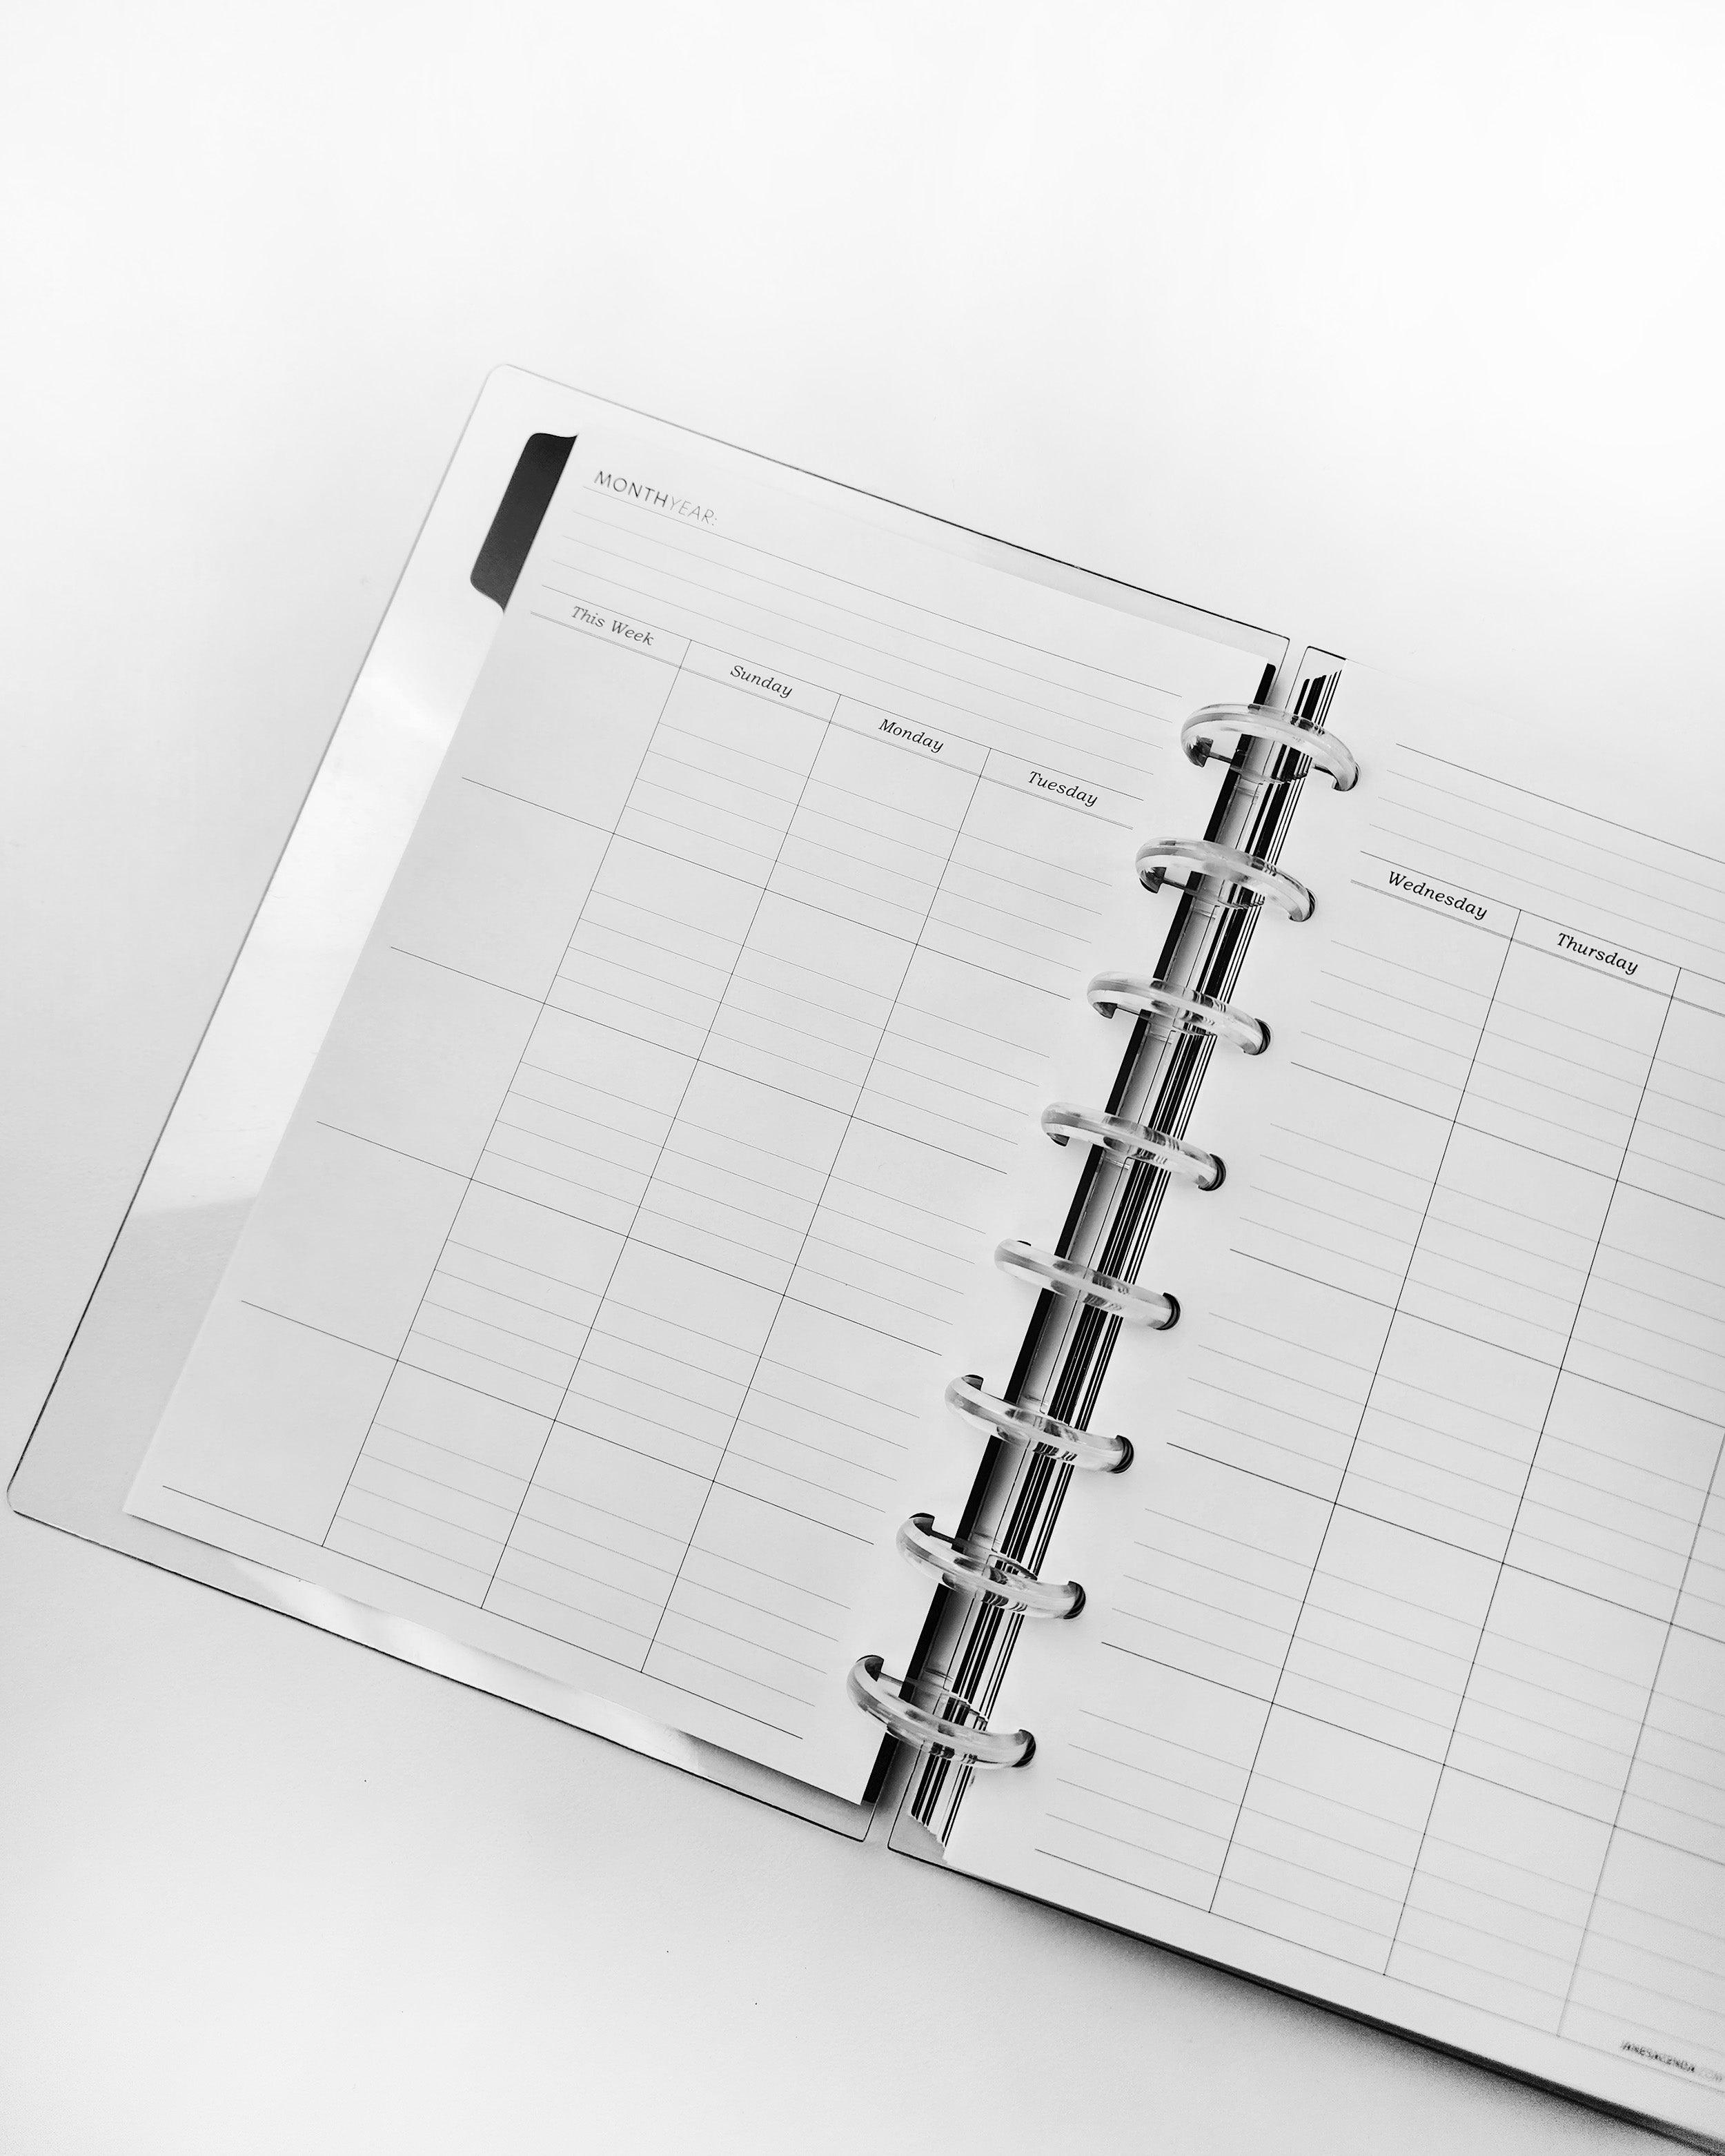 5 REASONS YOU SHOULD GET A DISCBOUND PLANNER (I USE THIS IN MY